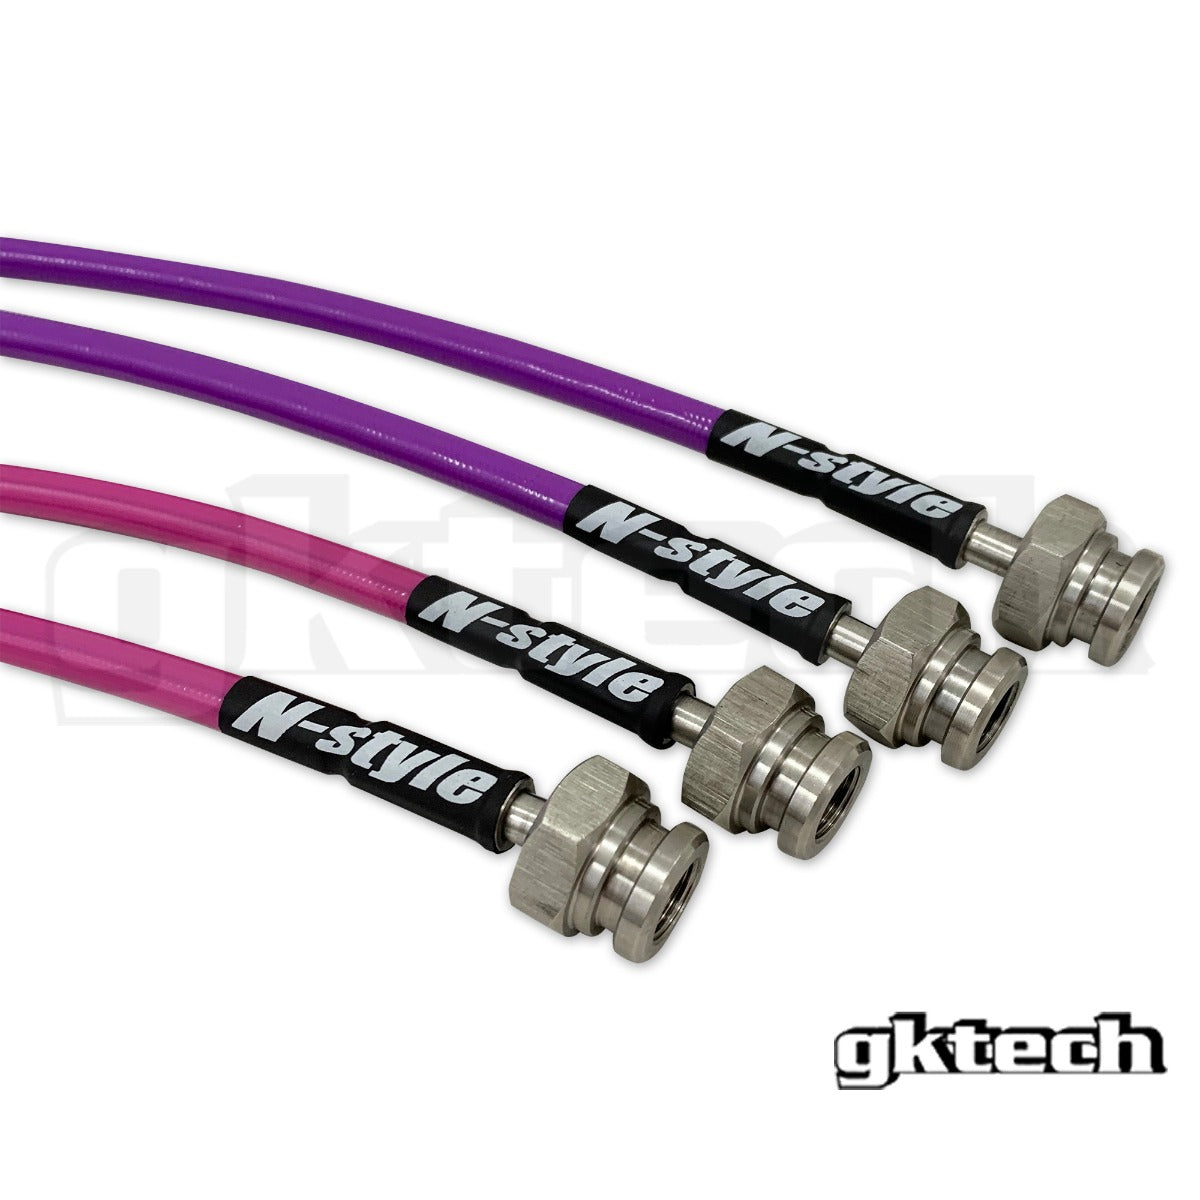 N-Style S13/180sx to Z32/GTST/GTR conversion braided brake lines